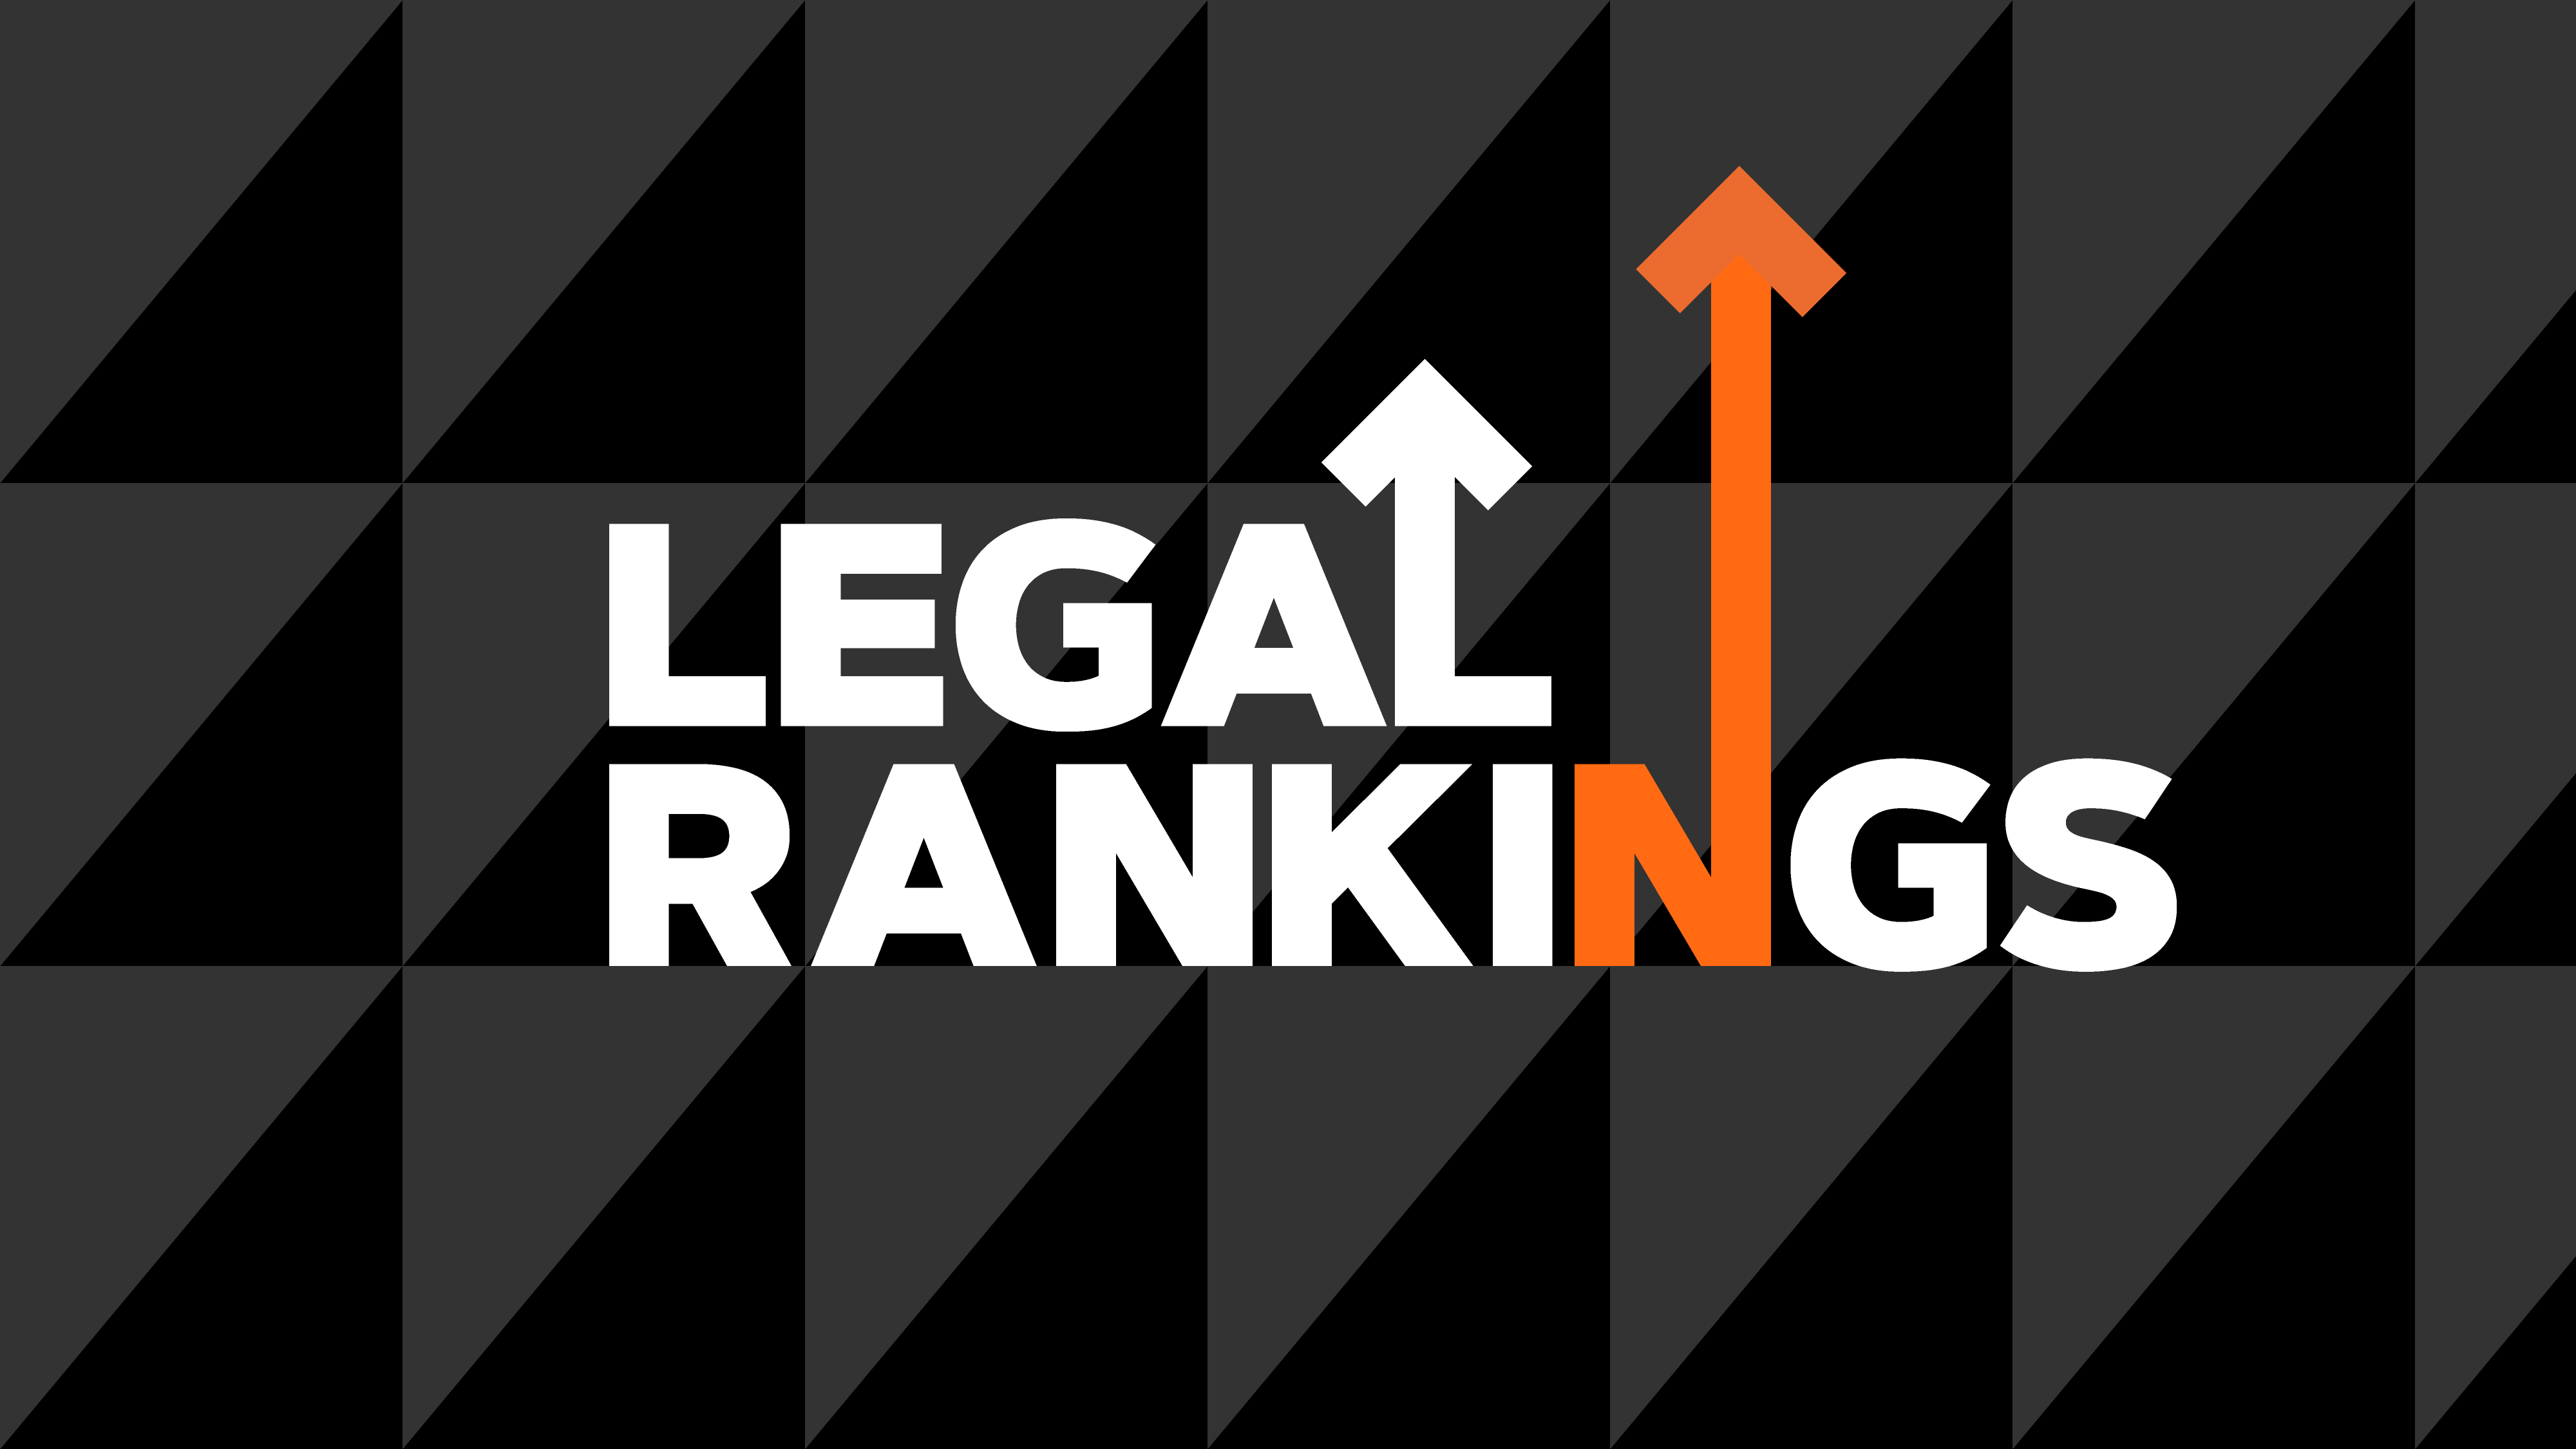 Legal 500 US 2018 Recommends Kasowitz as a Leading Law Firm